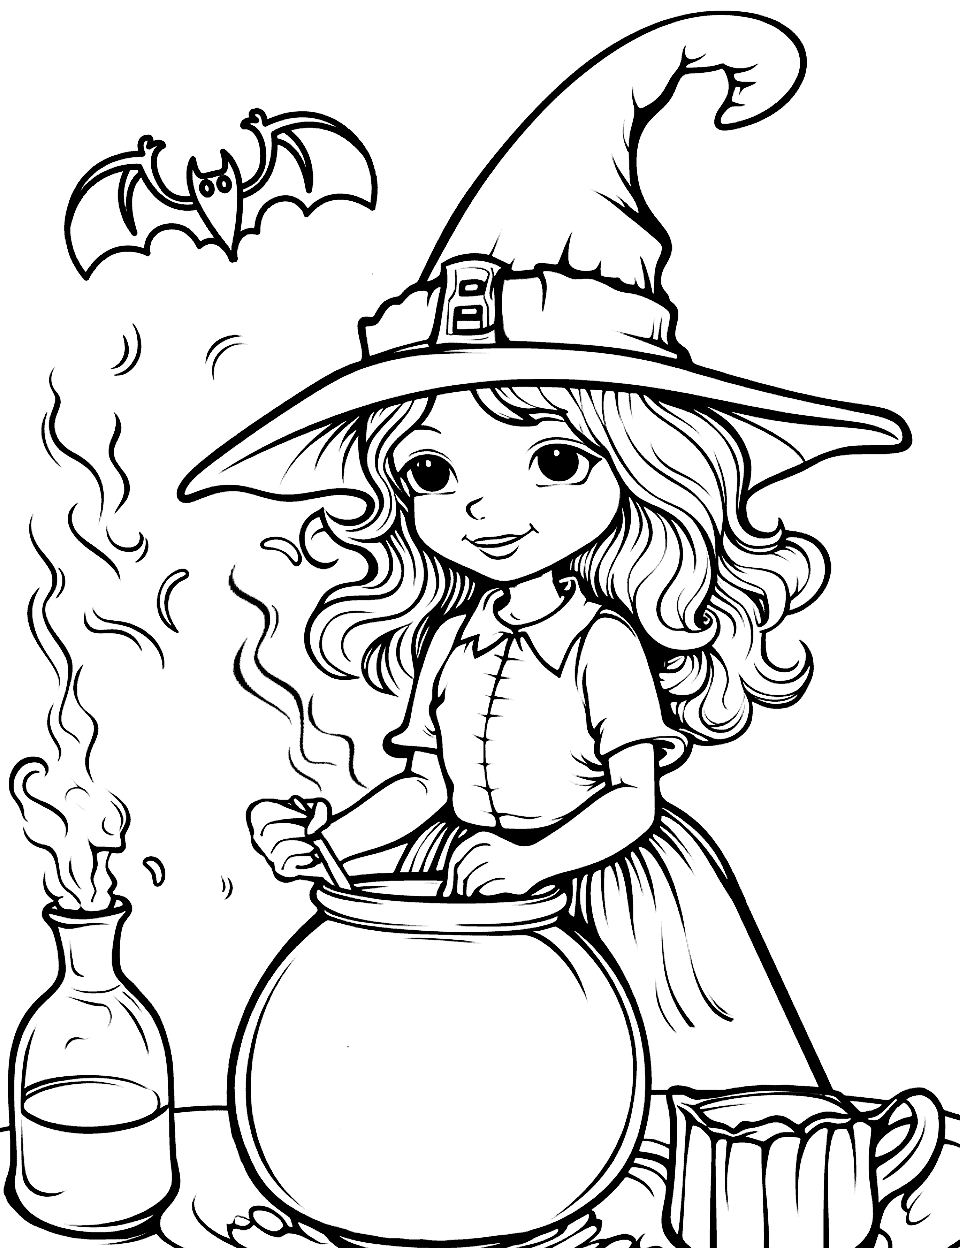 Witch and the Potion Coloring Page - A witch creating a potion that spills out in the smoke.